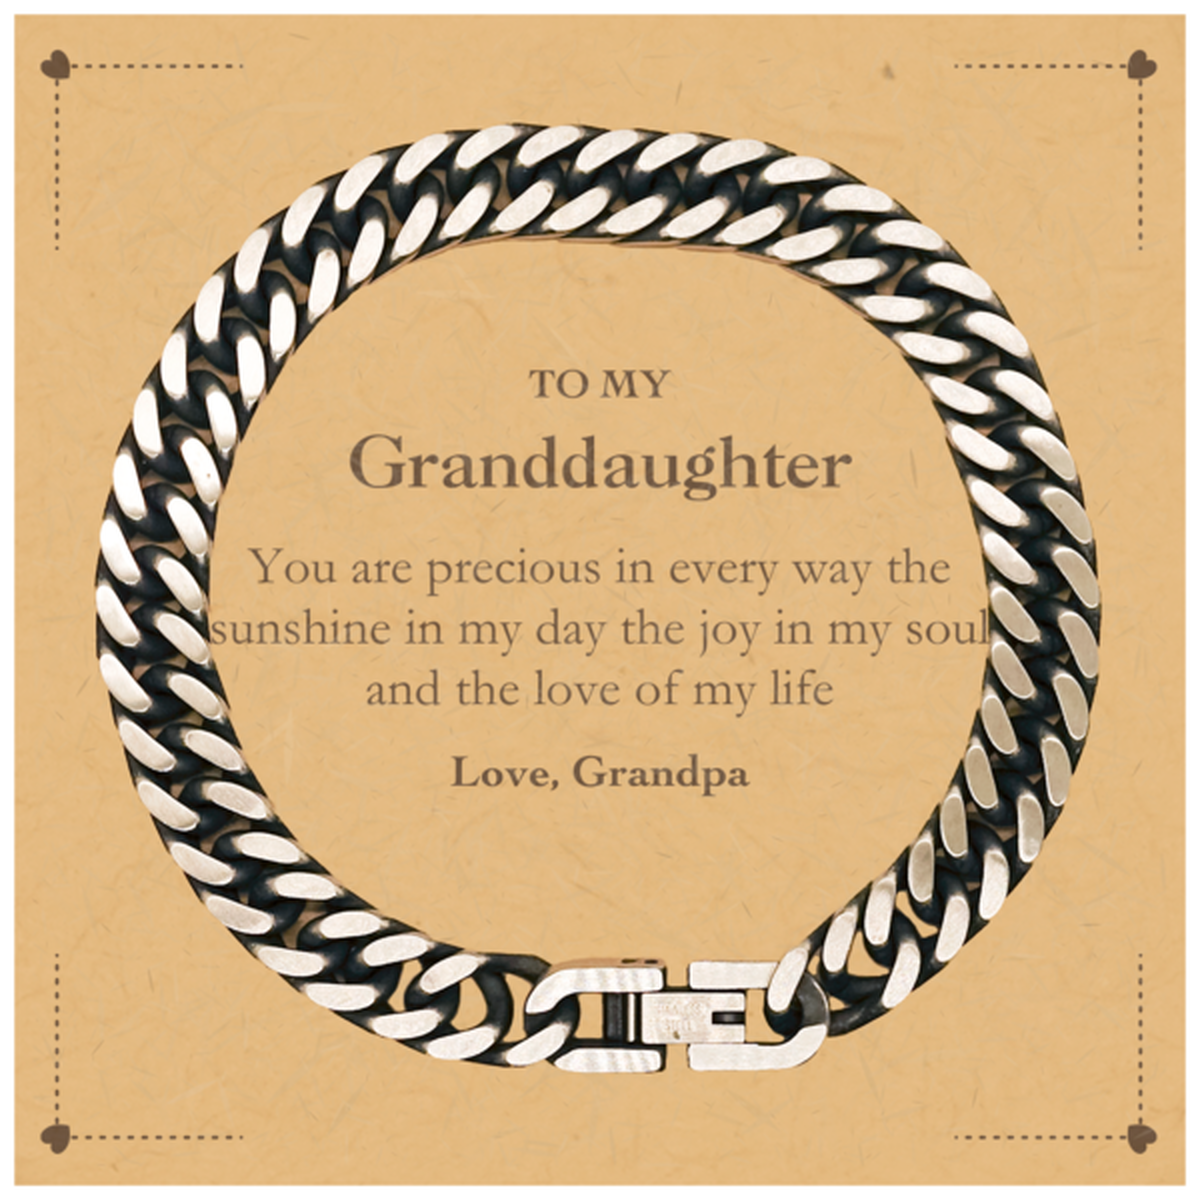 Graduation Gifts for Granddaughter Cuban Link Chain Bracelet Present from Grandpa, Christmas Granddaughter Birthday Gifts Granddaughter You are precious in every way the sunshine in my day. Love, Grandpa